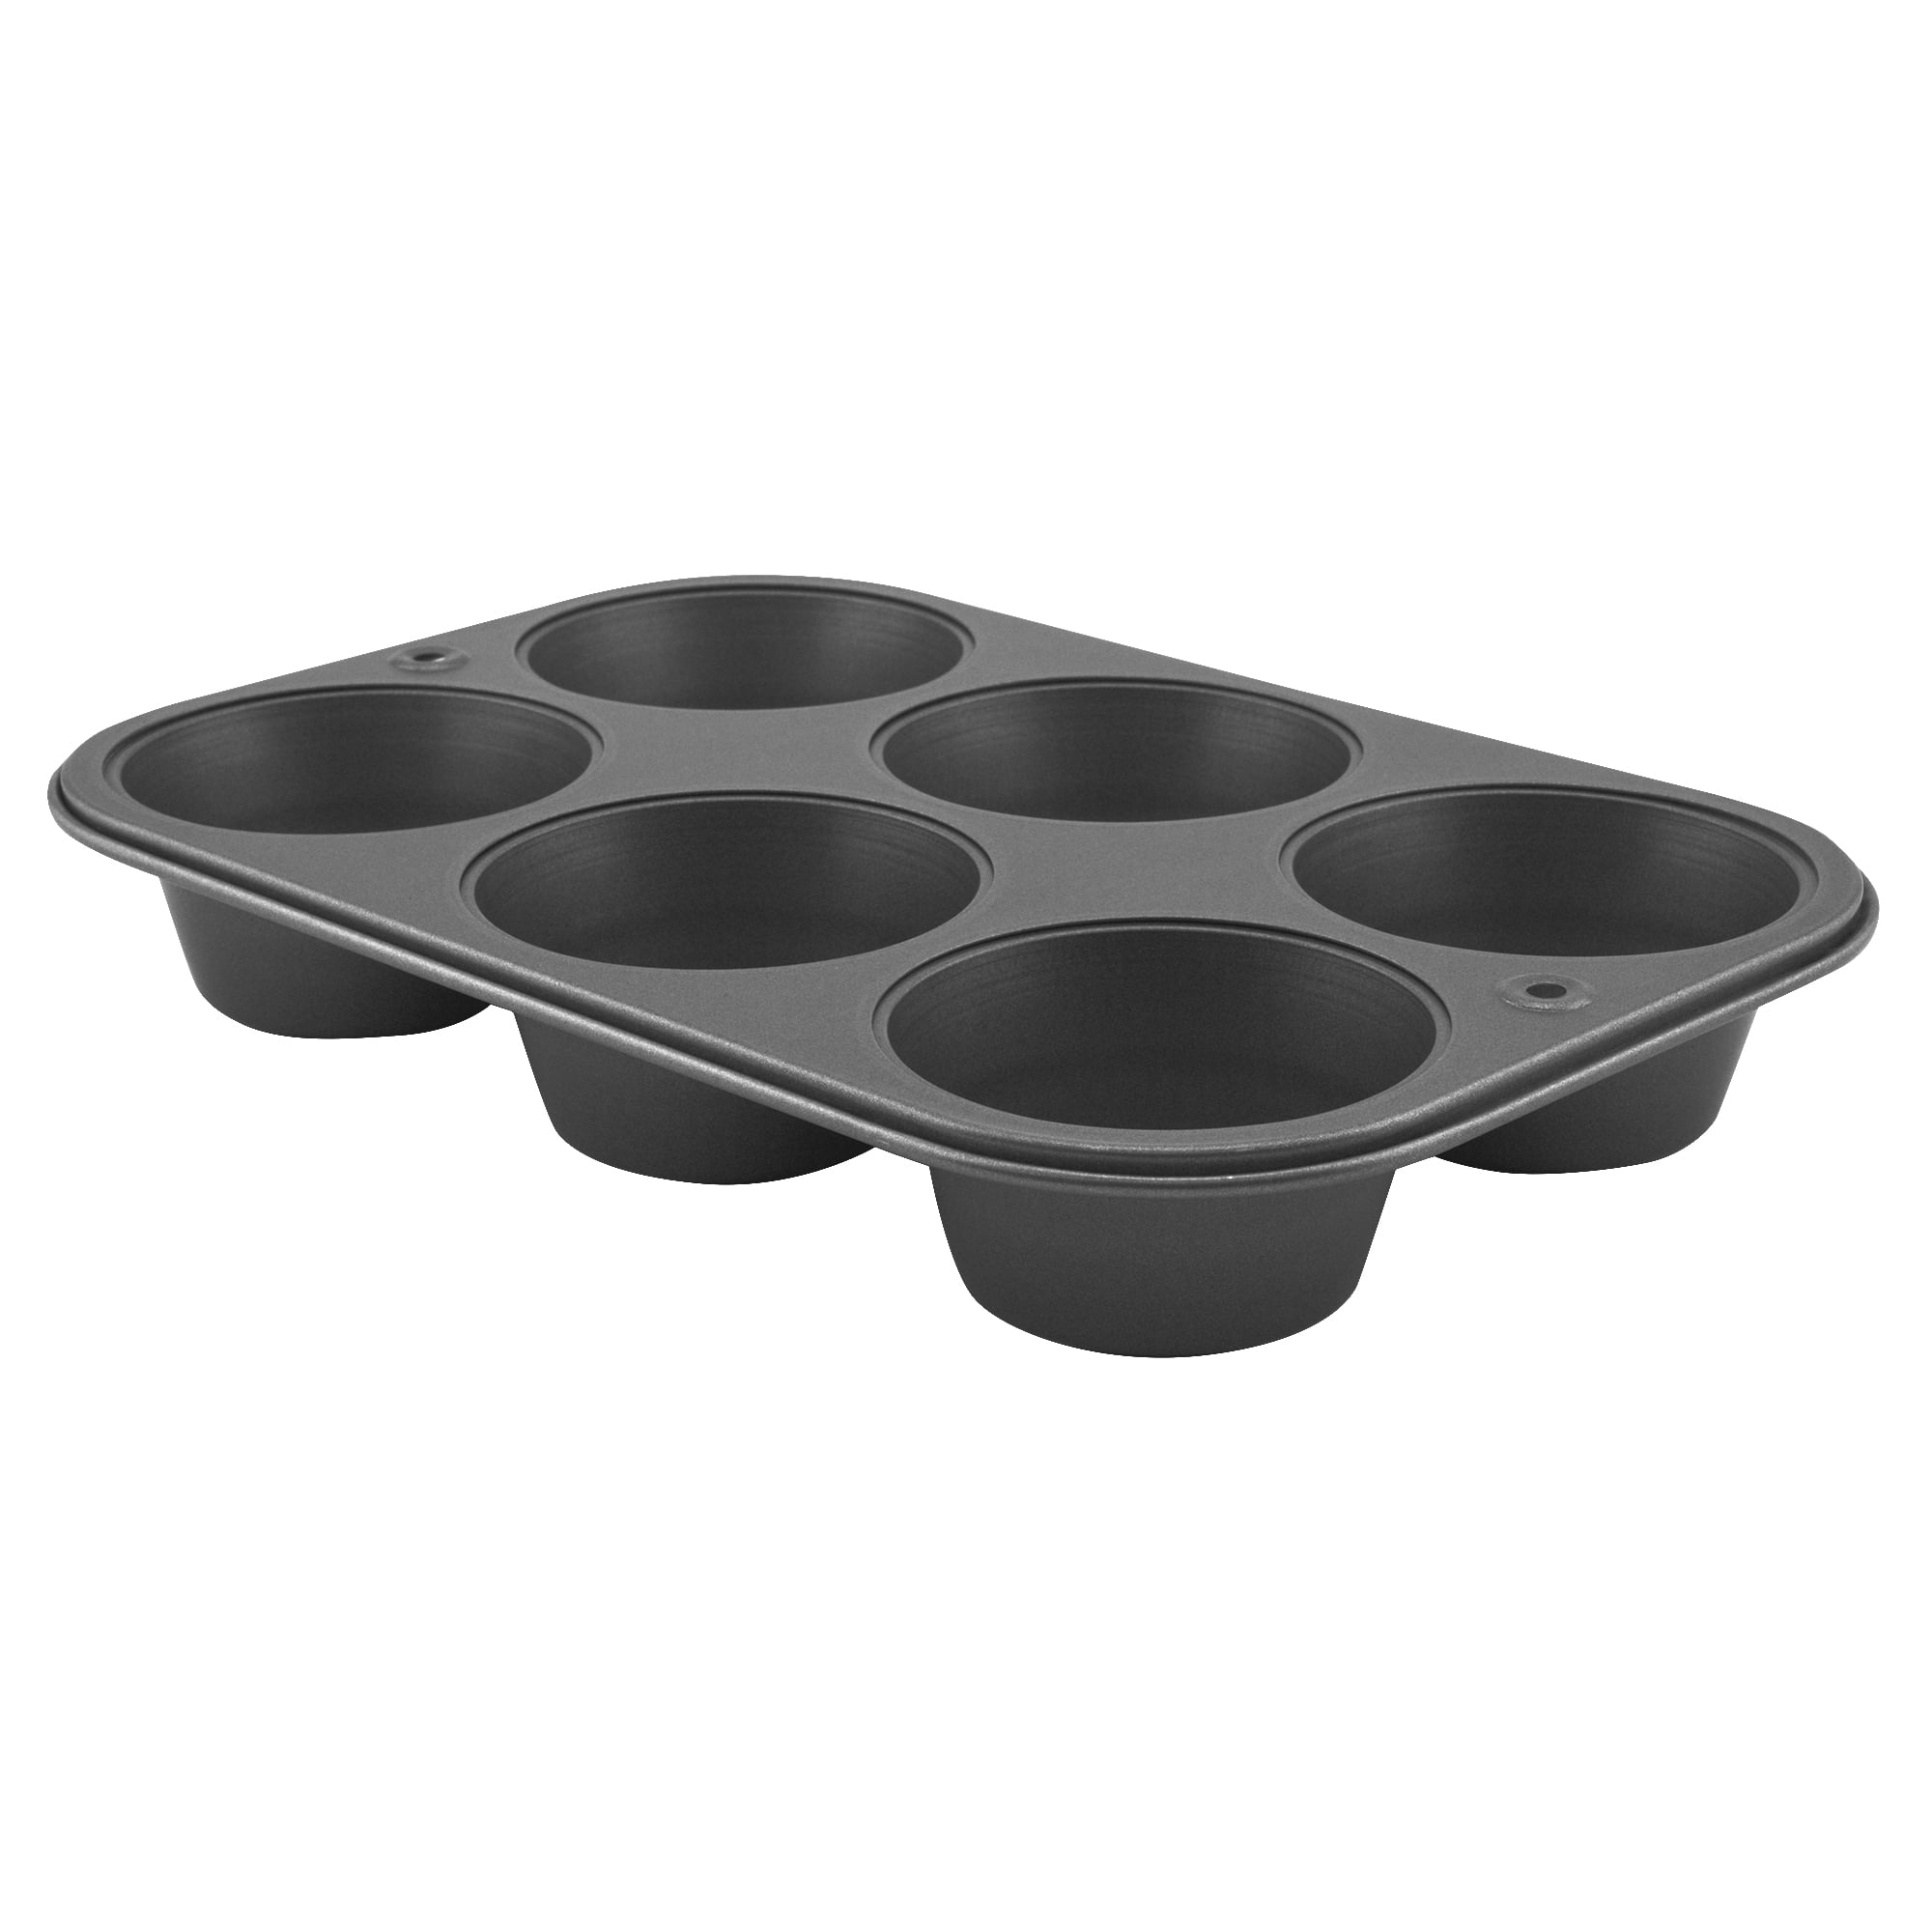 Silicon Bakeware Baking Mould for Yorkshire Pudding Non-Stick Giant Cupcake Tin Grey Baking Case 27.8 x 19 x 5 cm Deep and Jumbo Muffin Tray 6 Cup Large Silicone Muffins Pan Cupcakes Bun